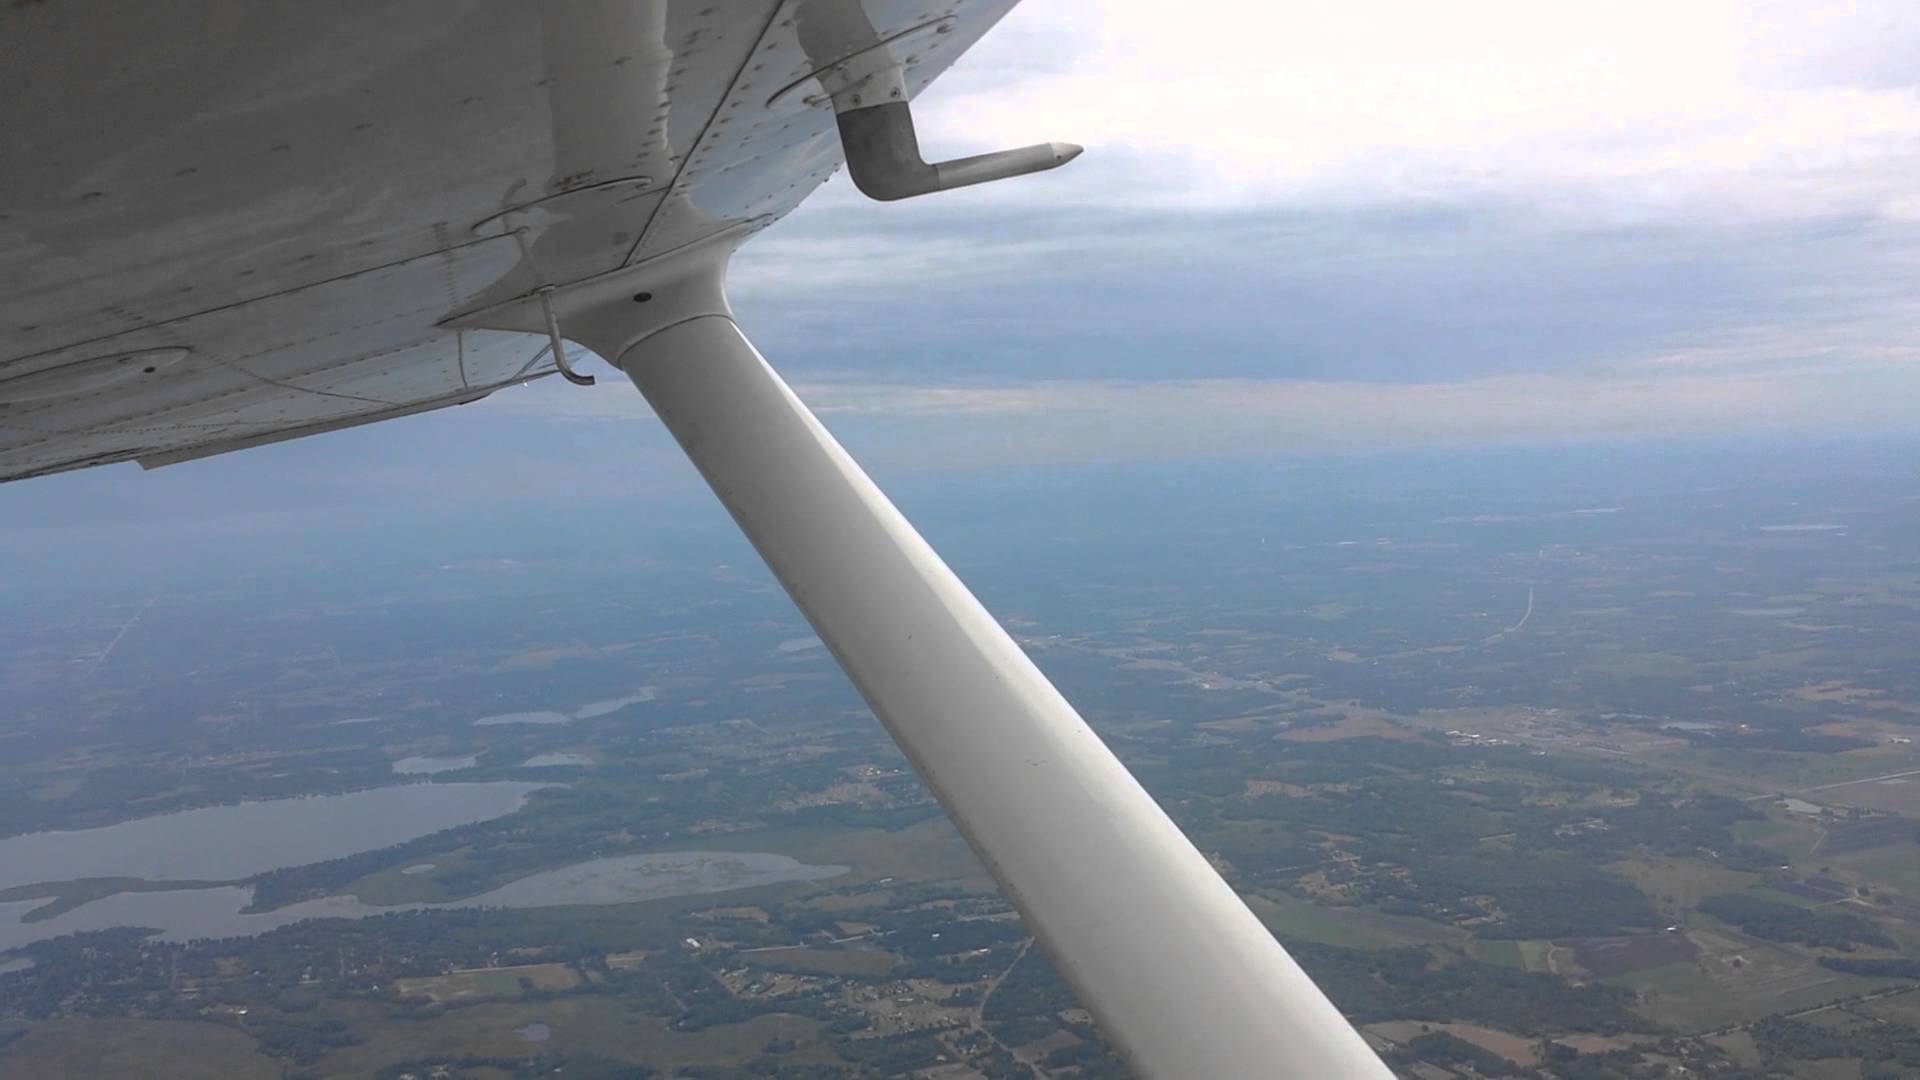 Cessna 172 spin and upside down flight inversion - YouTube